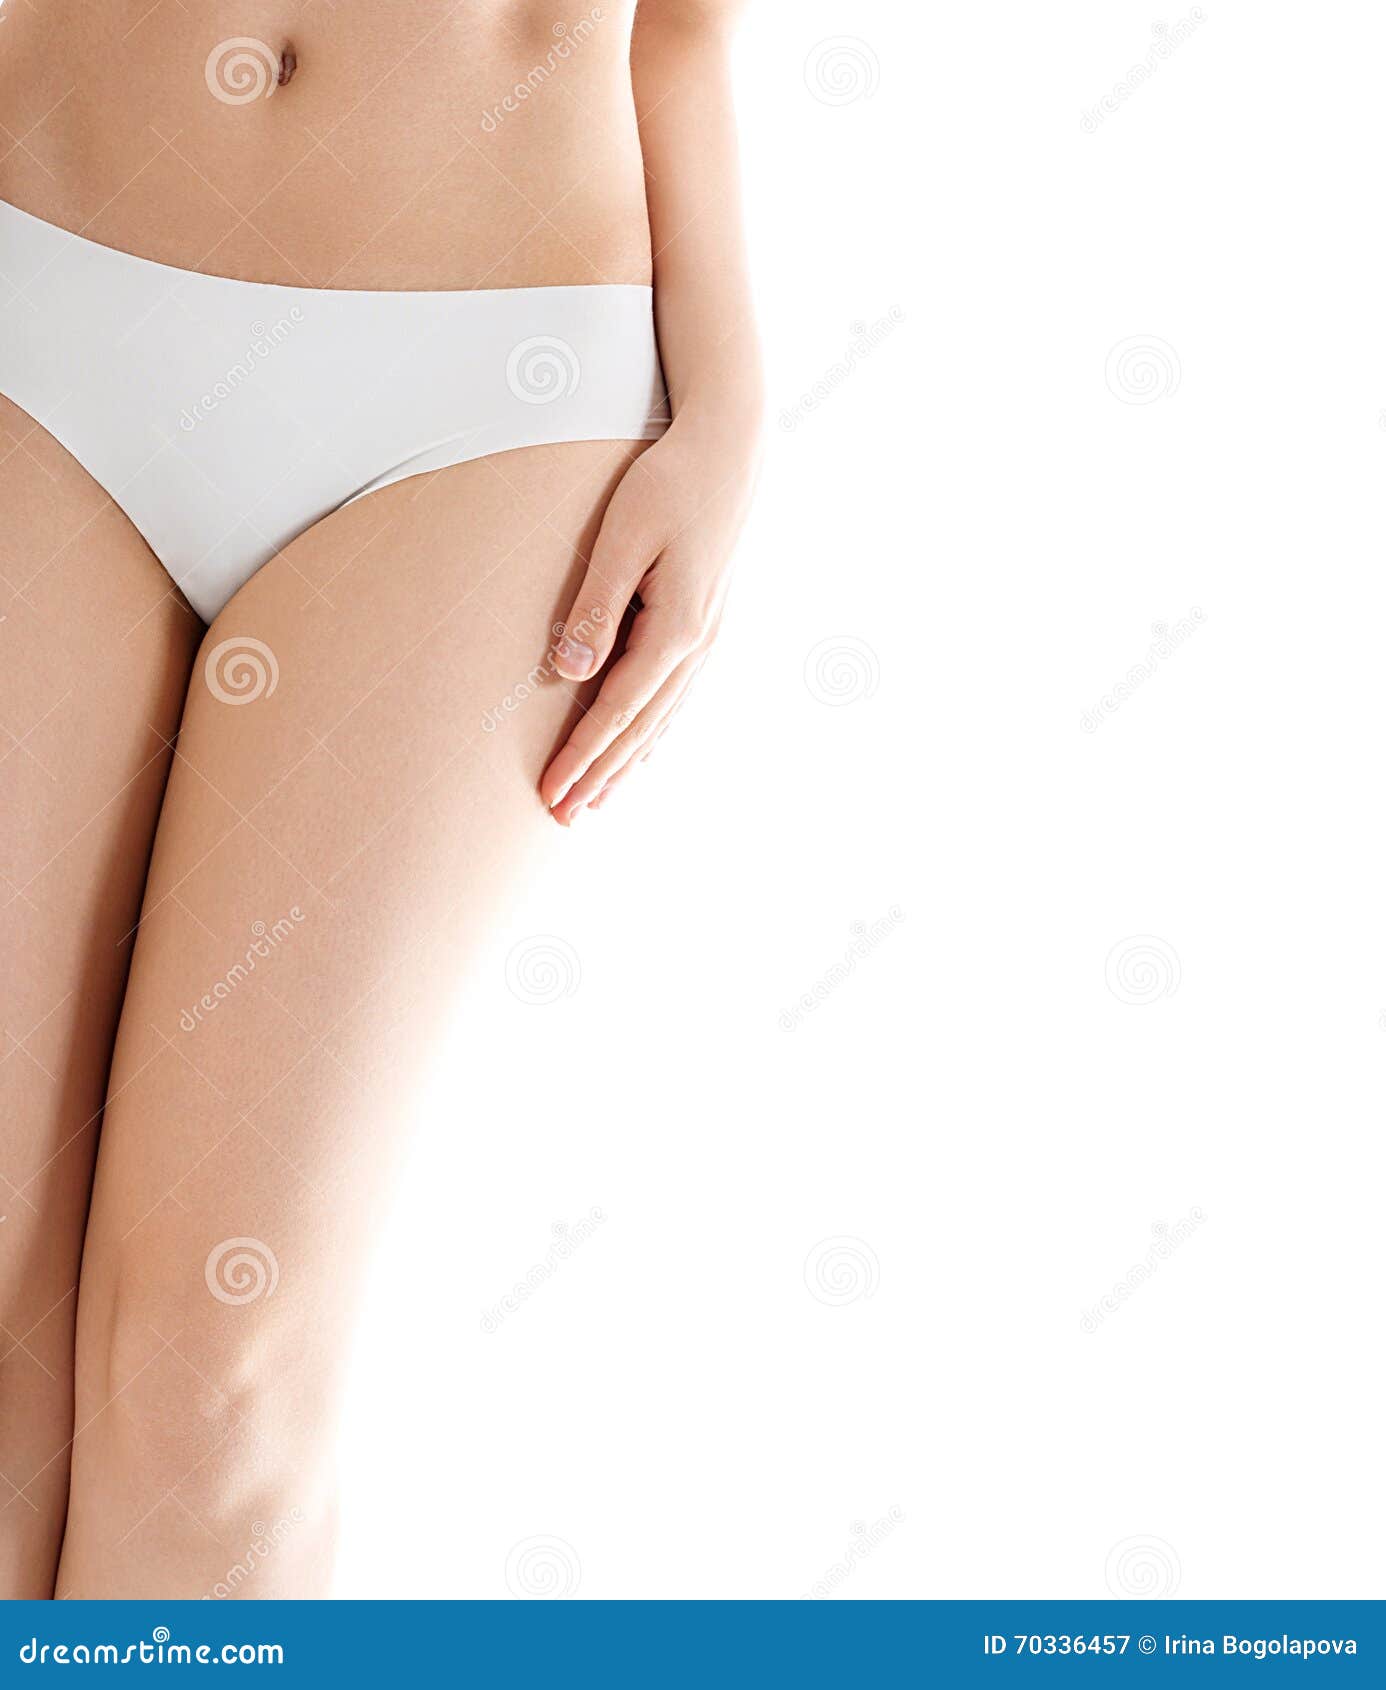 Beautiful Woman in White Cotton Underwear Stock Image - Image of